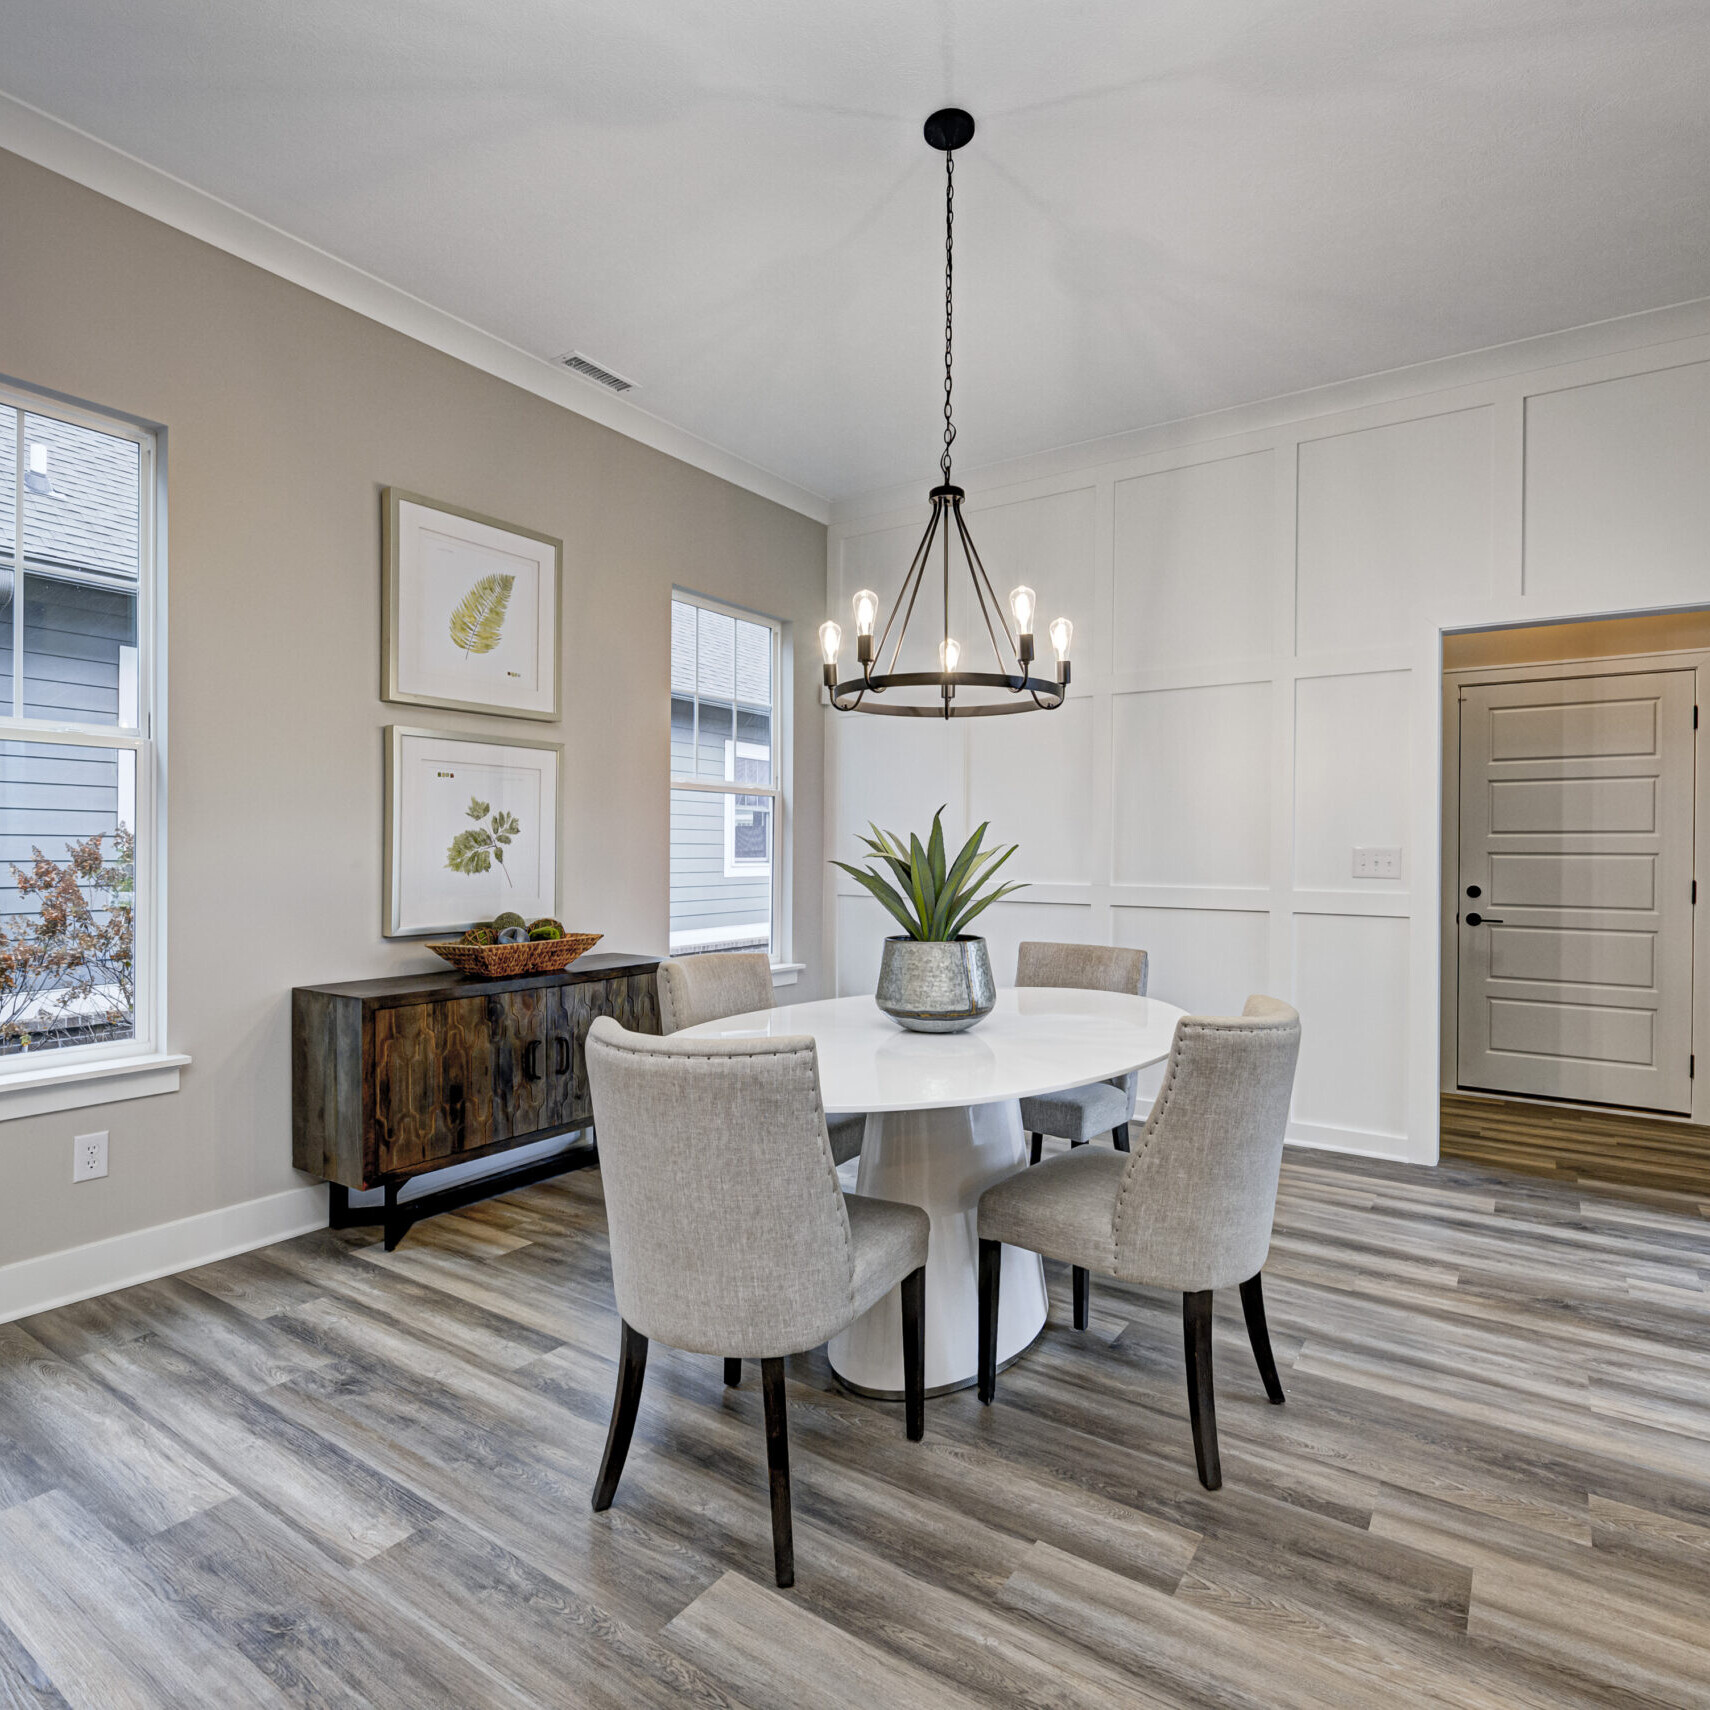 A dining room with hardwood floors and white walls, built by a Custom Home Builder in Carmel Indiana.